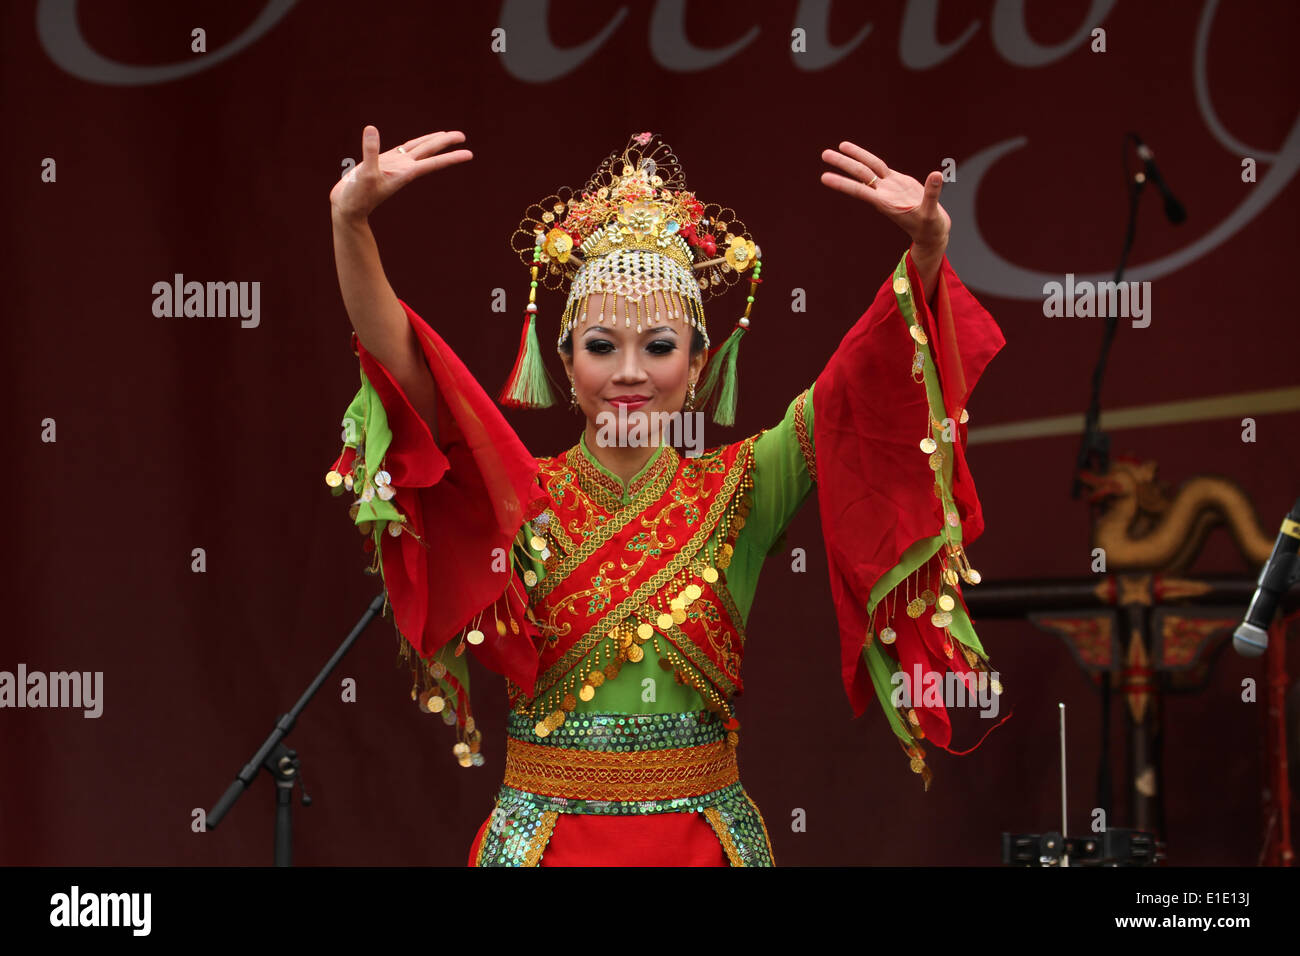 London, UK. 31 May 2014.  Peree dancer from Sumatra. The dance is a thanks giving dance to the gods and is performed with food on plates. Credit: David Mbiyu/ Alamy Live News Stock Photo